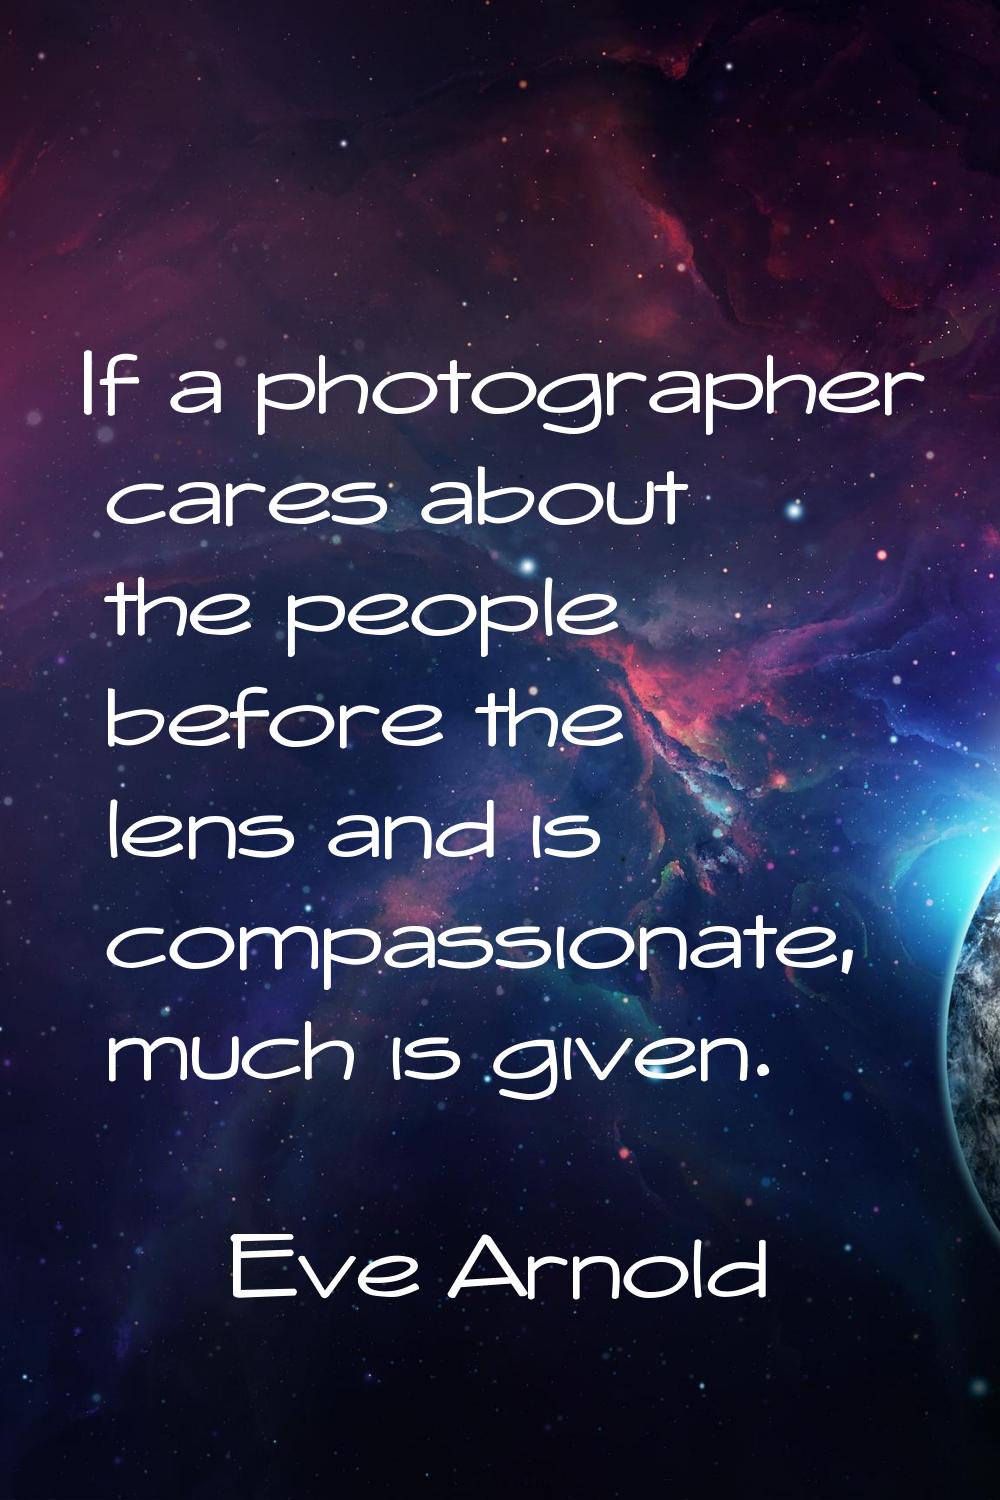 If a photographer cares about the people before the lens and is compassionate, much is given.